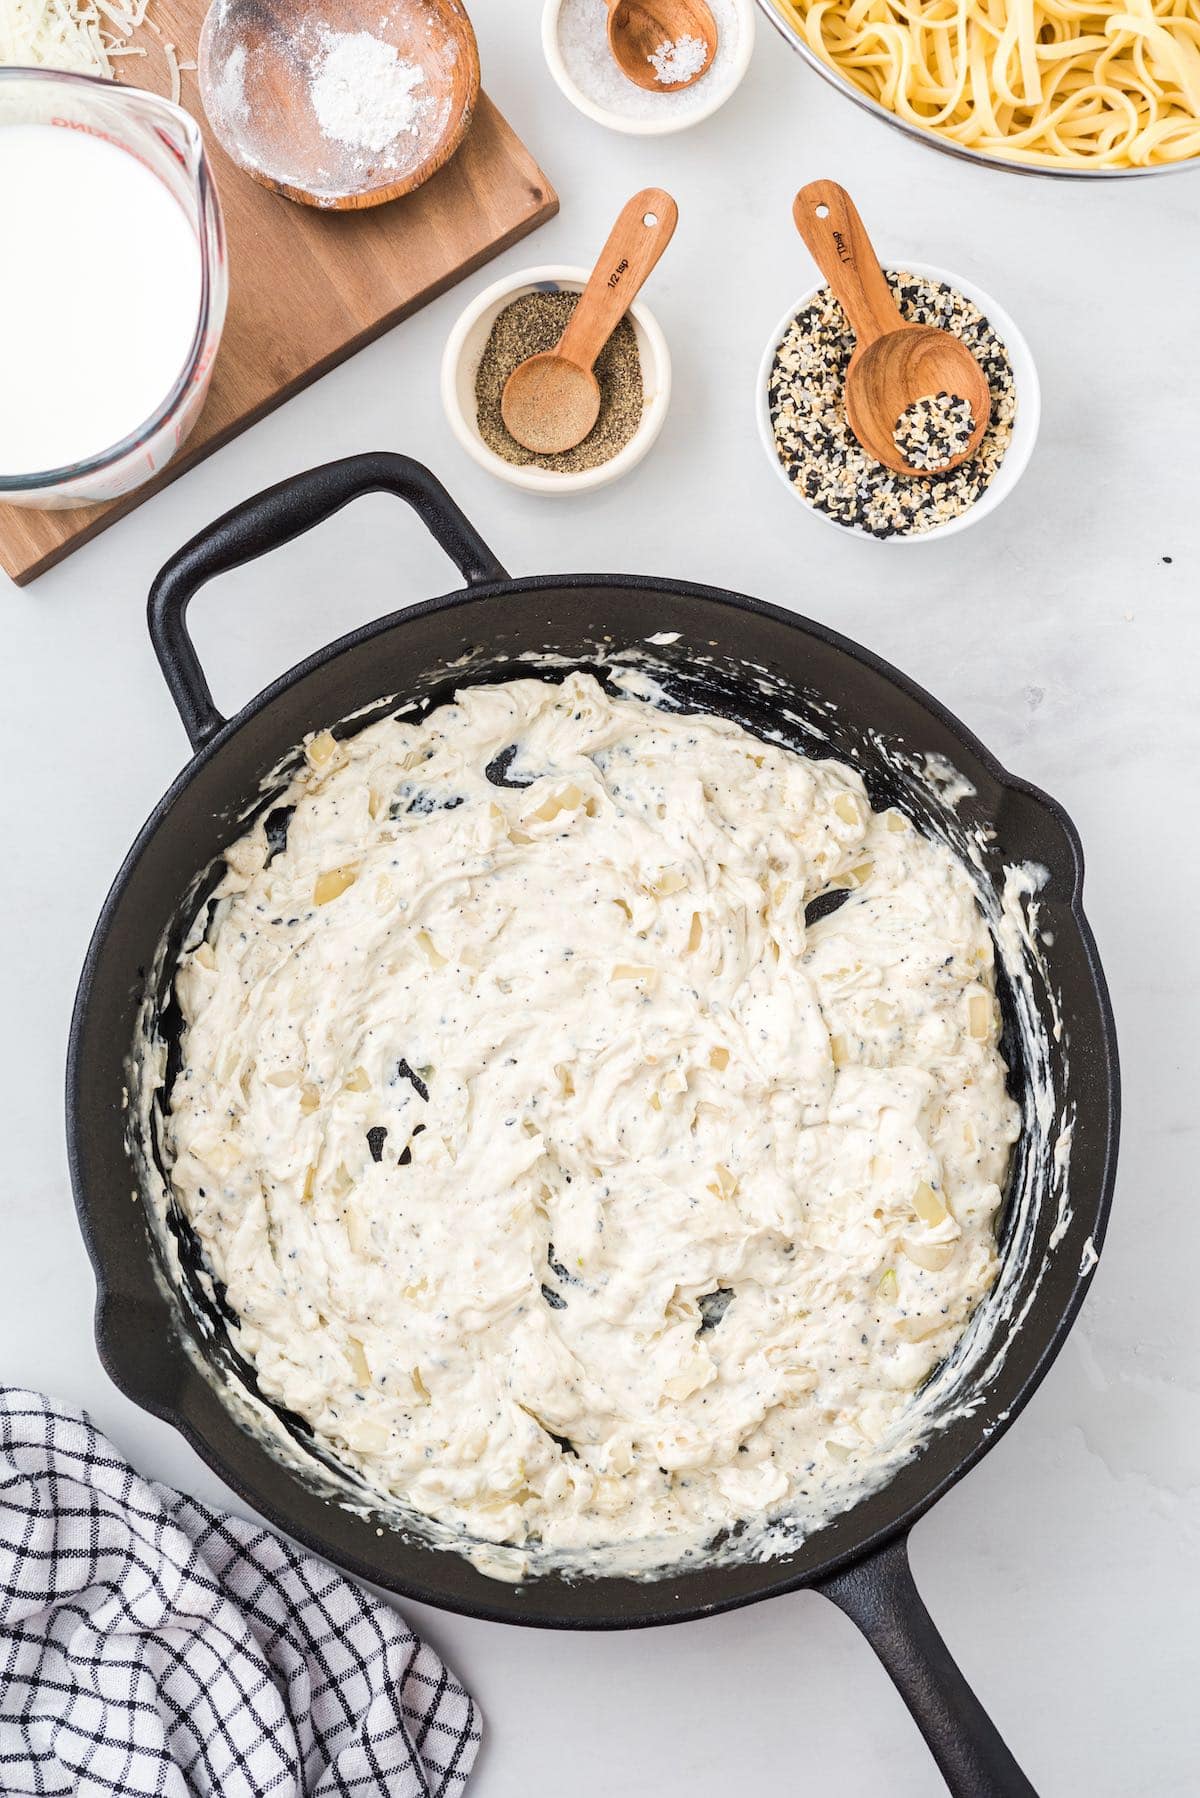 Add cream cheese into the pan